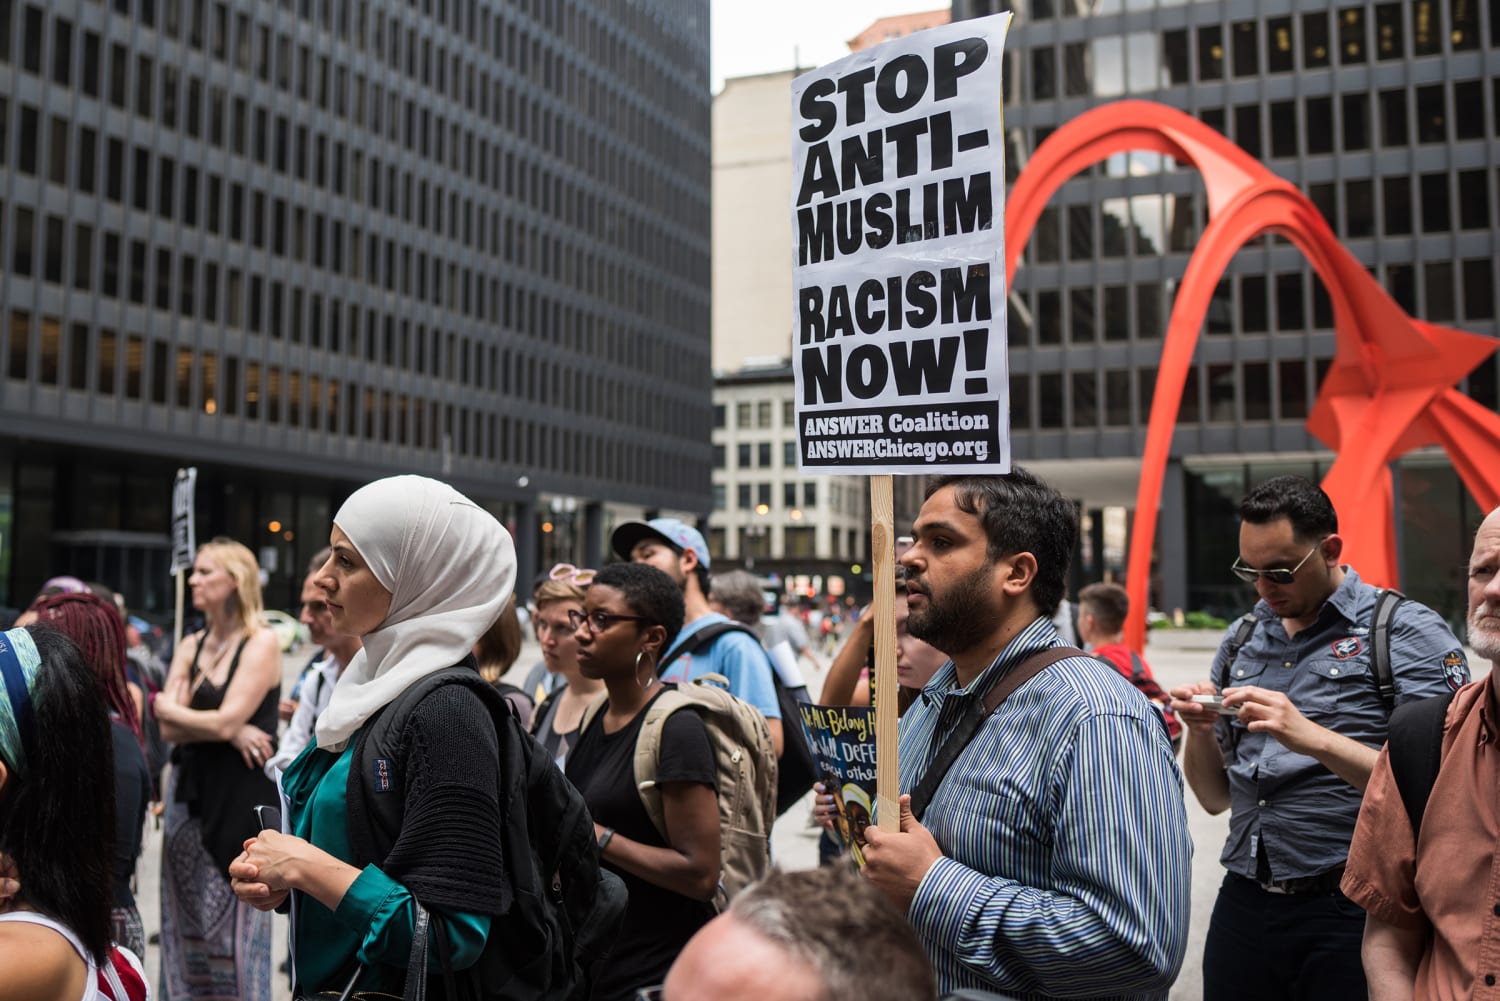 Head of Program Profiling Muslims in Chicago Steps Down Amid Pressure